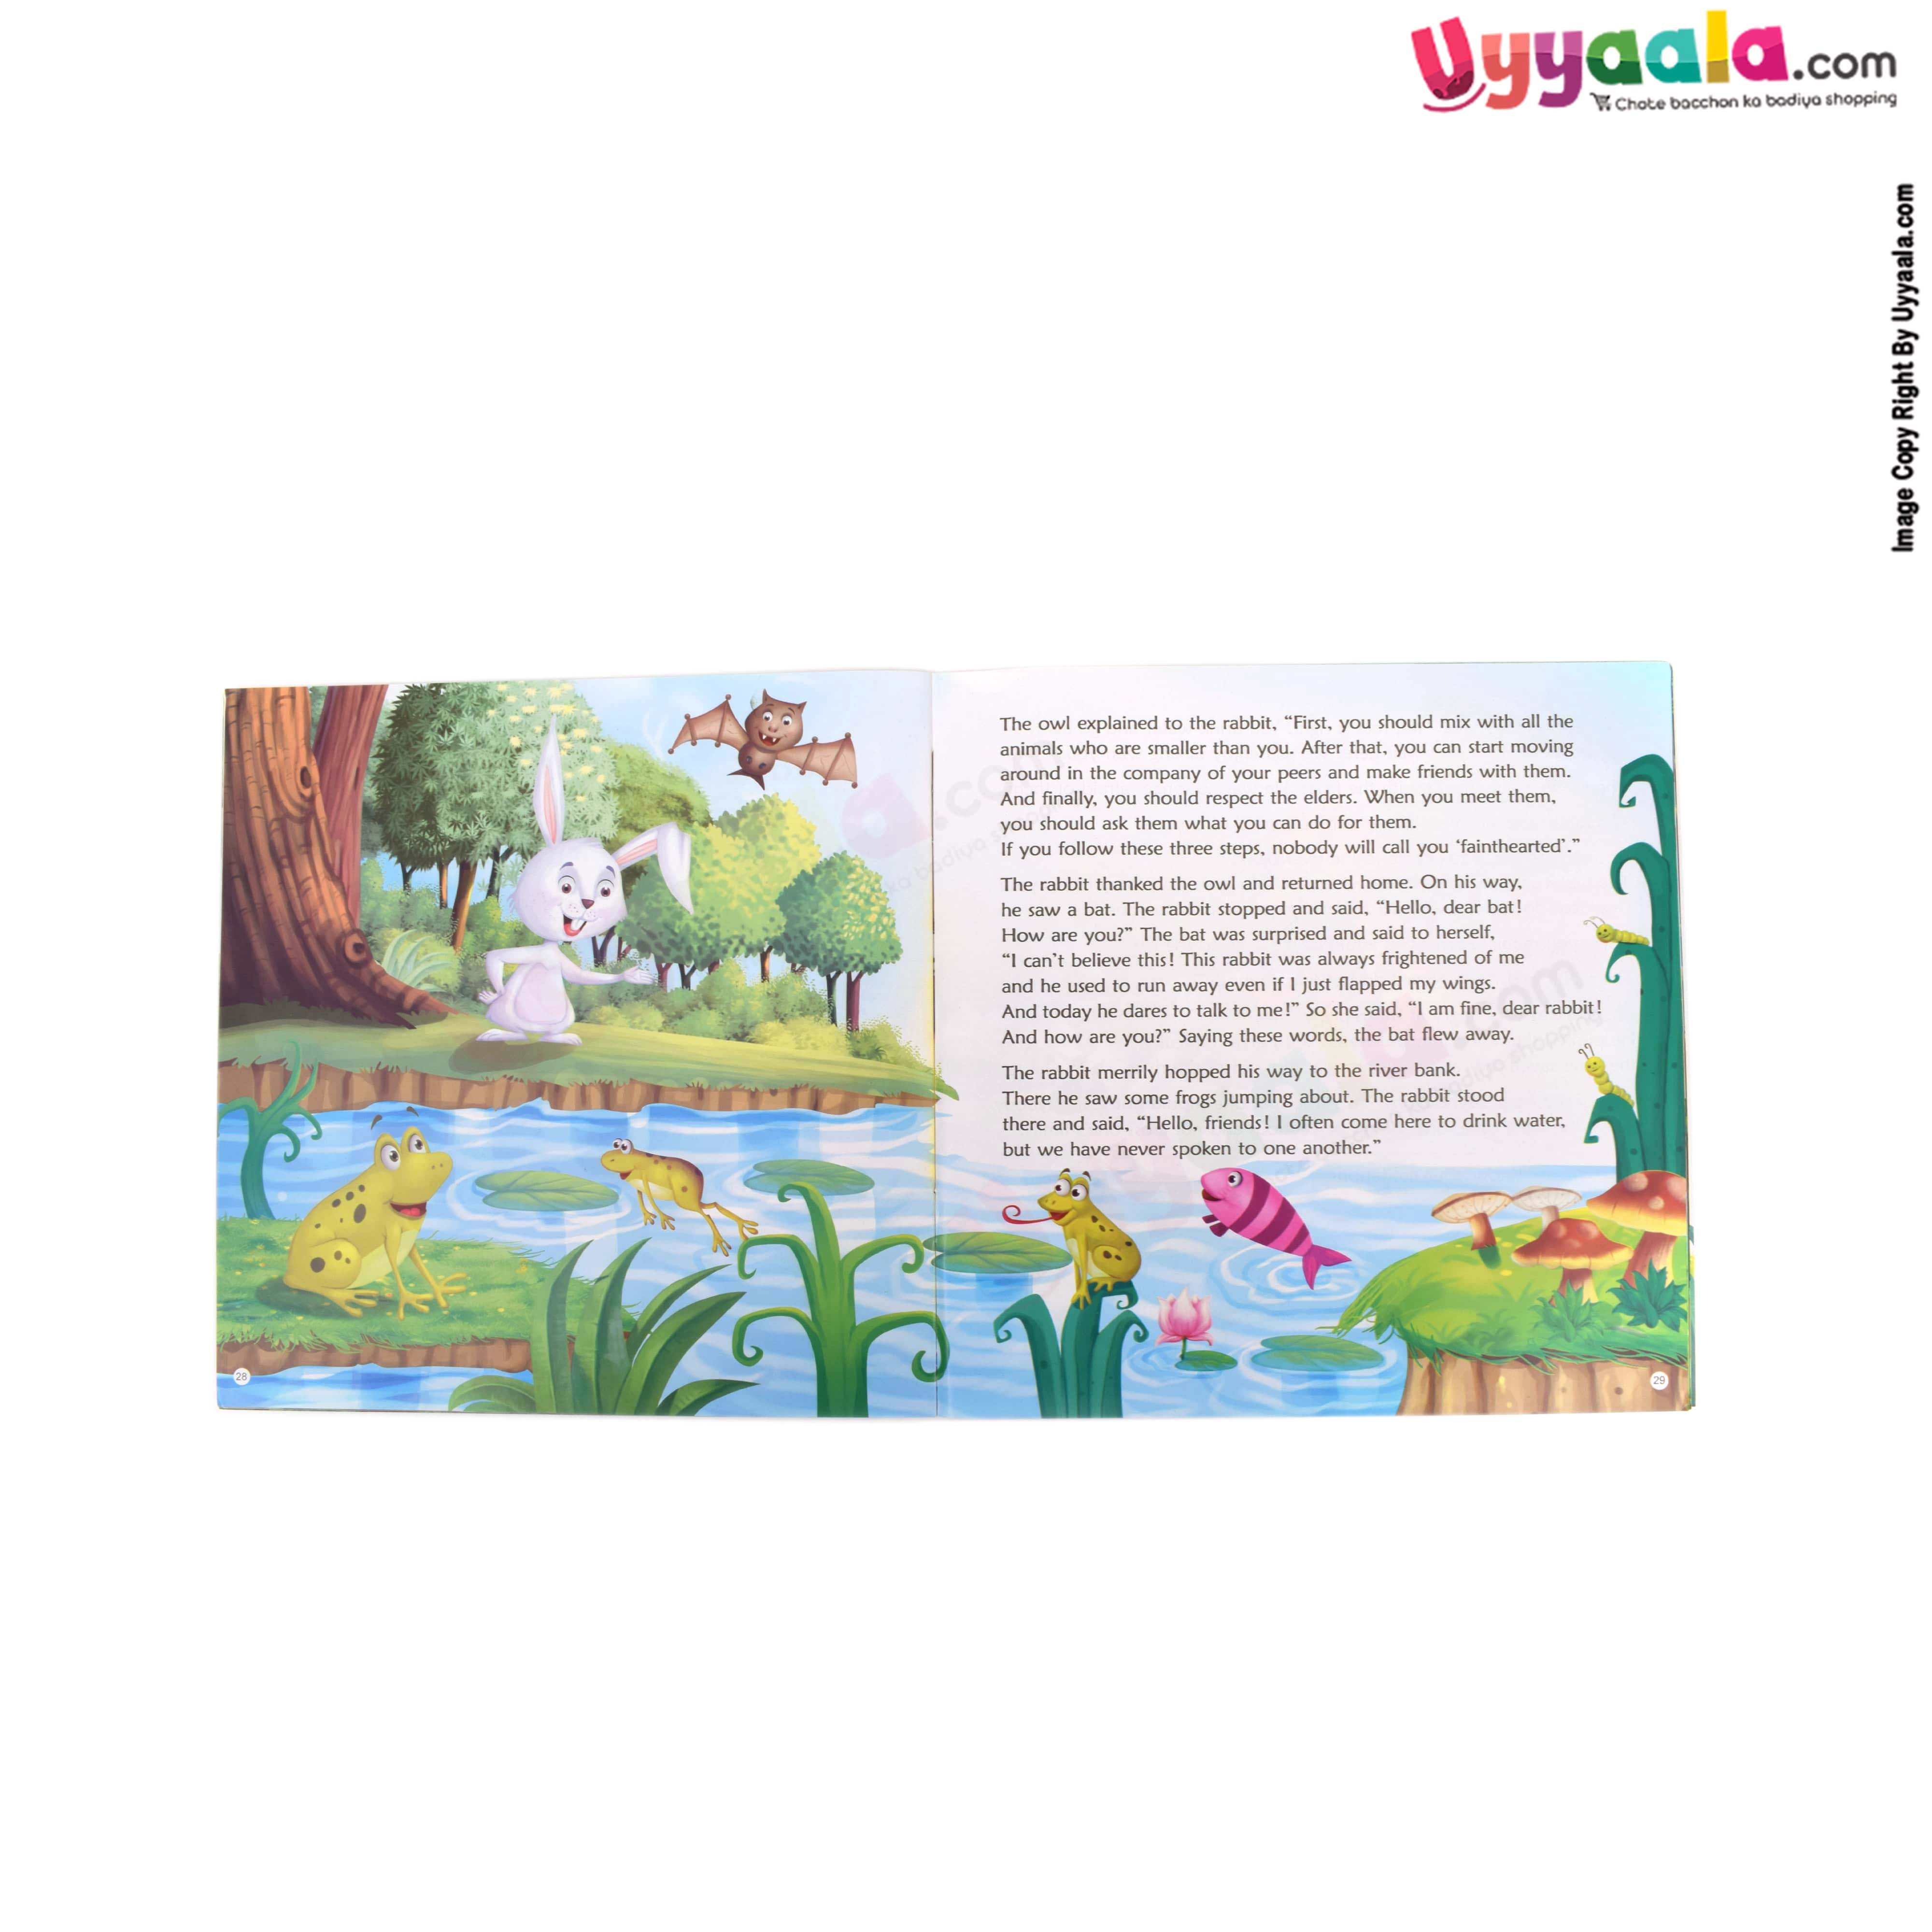 NAVNEET any time tales stories for children, Its story time pack of 4